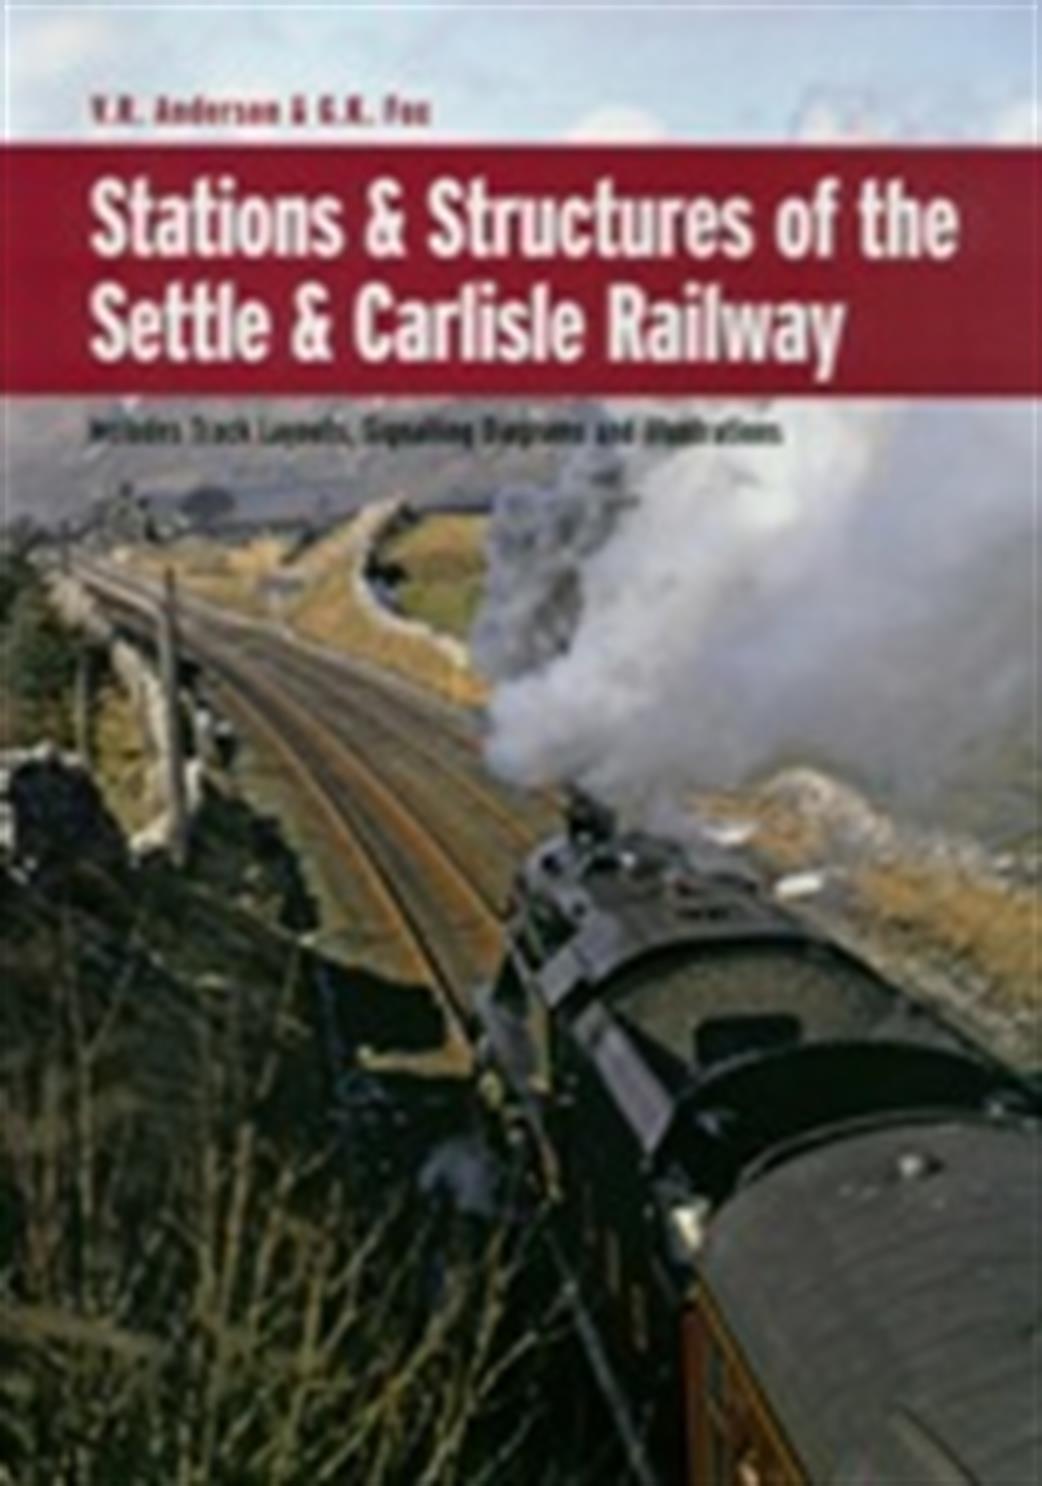 Ian Allan Publishing  9780860936626 Stations and Structures of the Settle & Carlisle Railway by V R Anderson & G K Fox